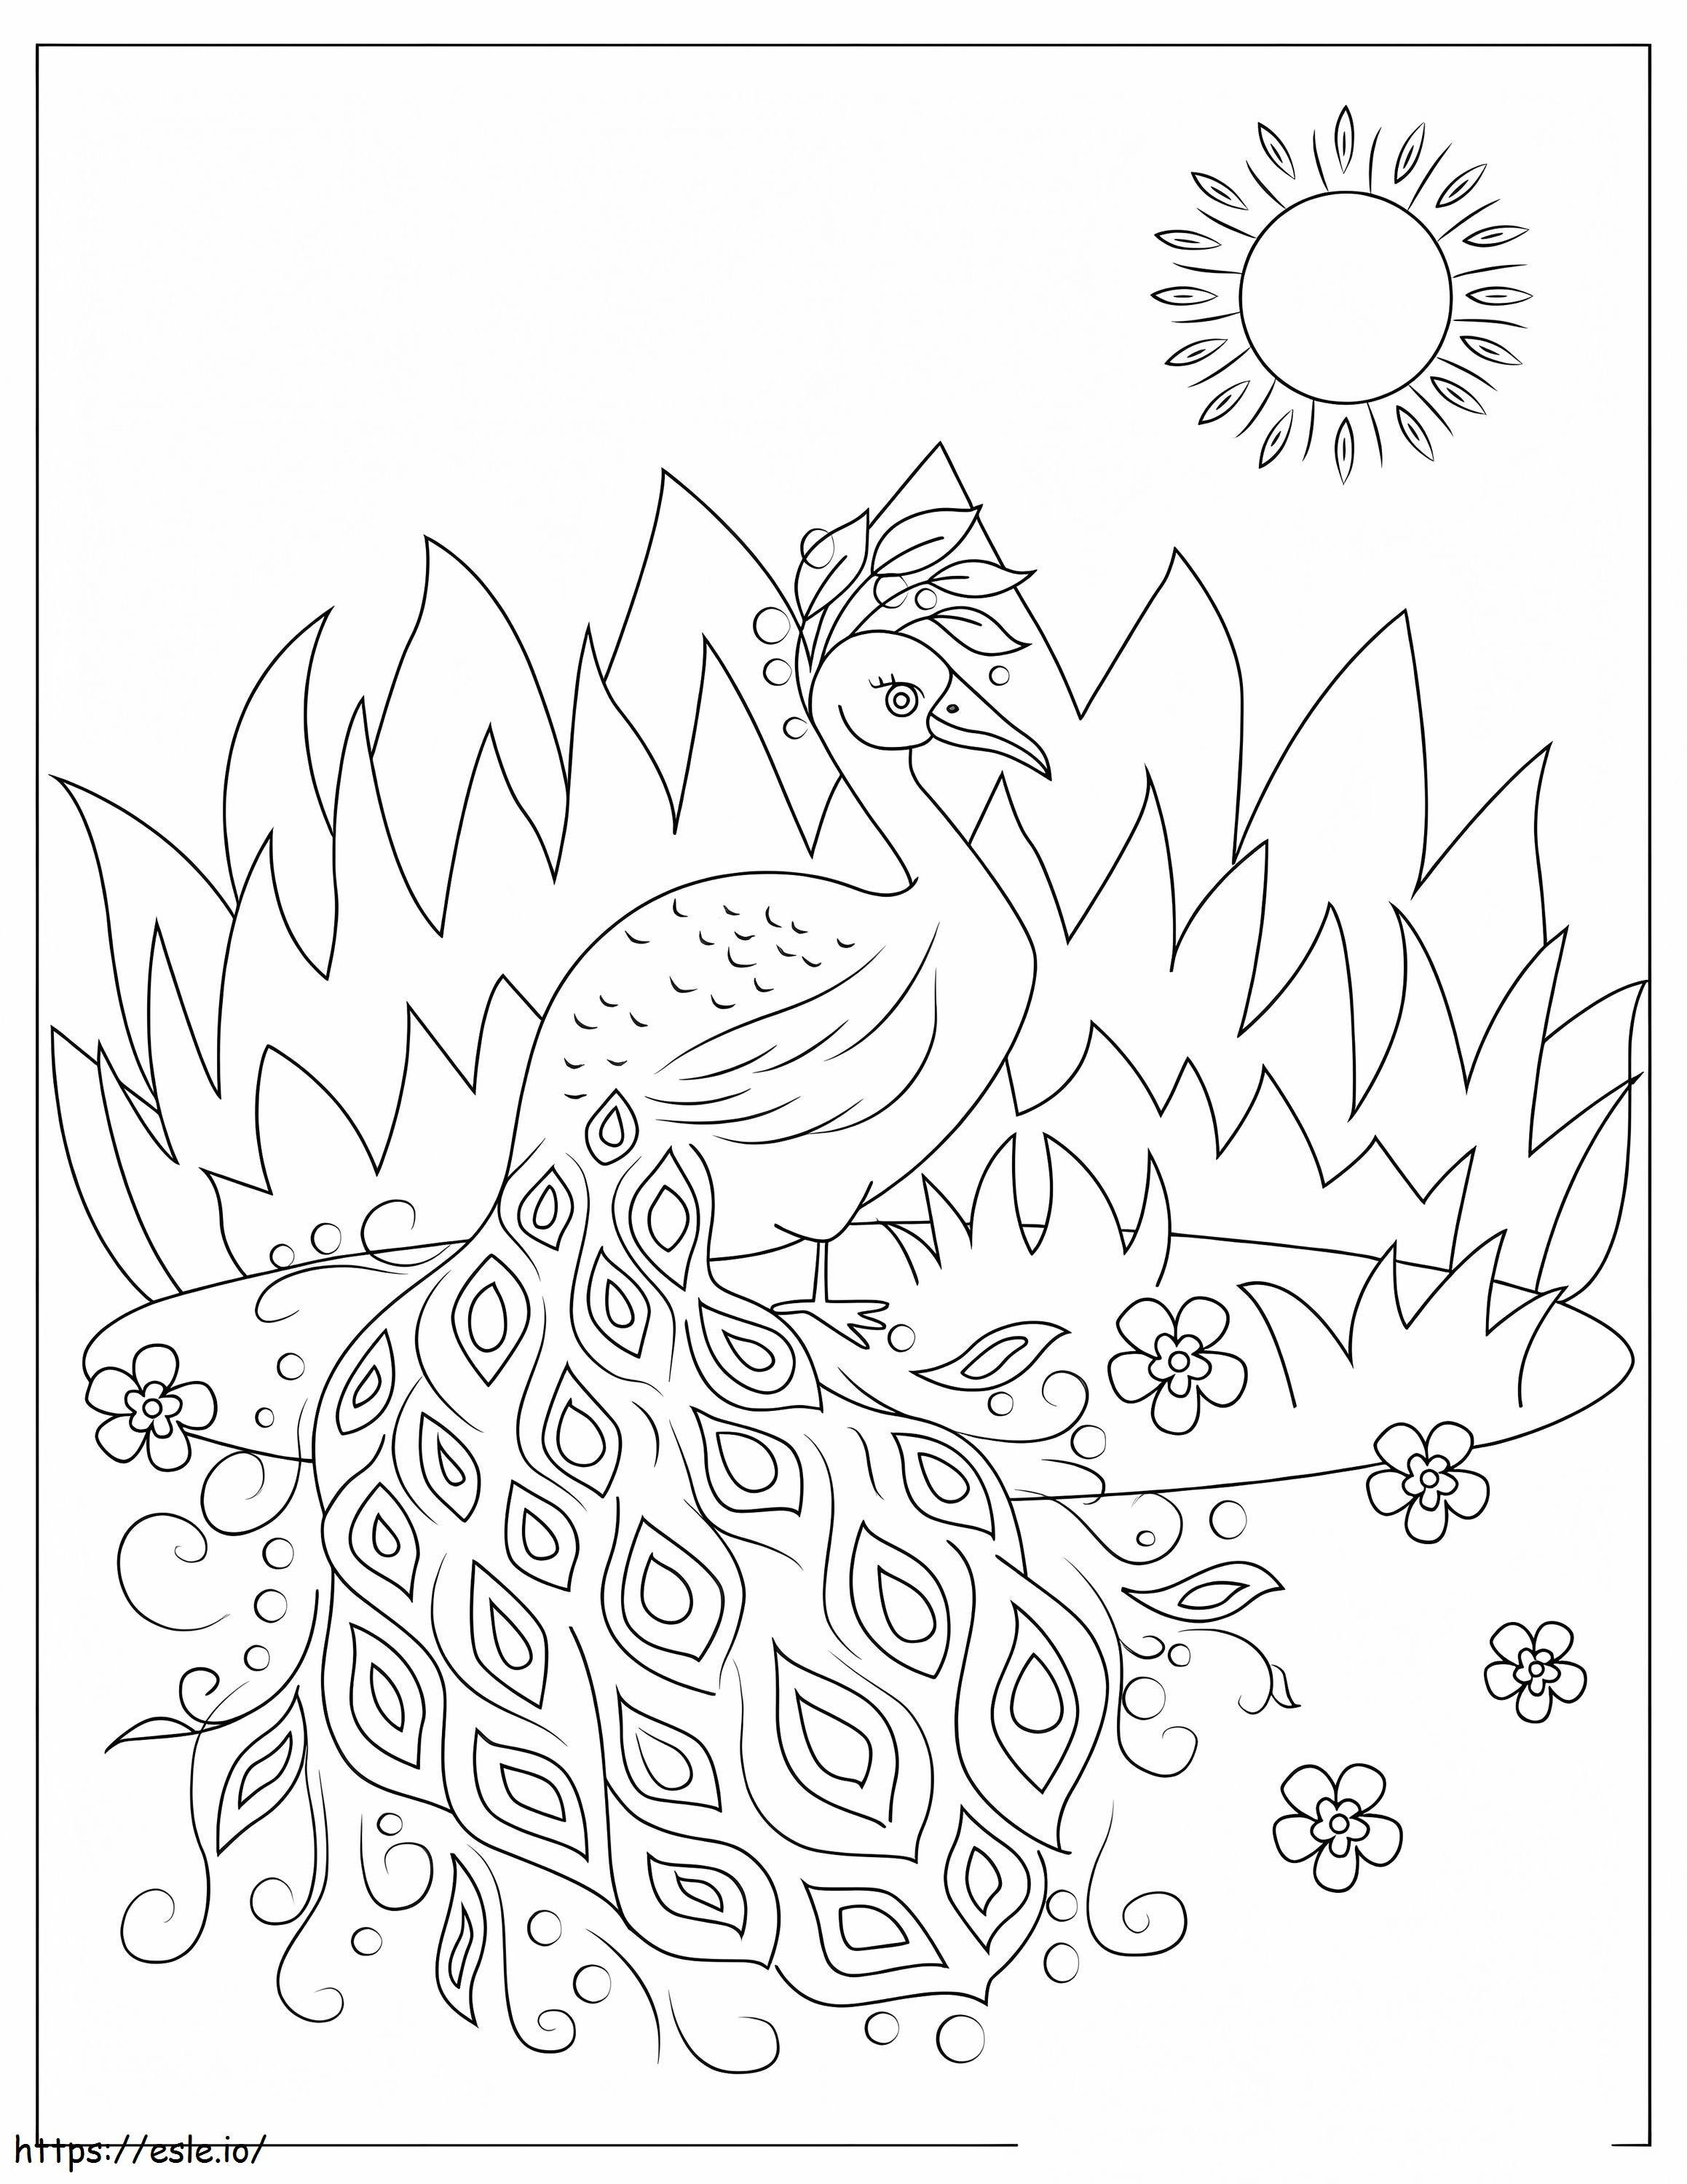 Peacock Standing Under The Sun coloring page